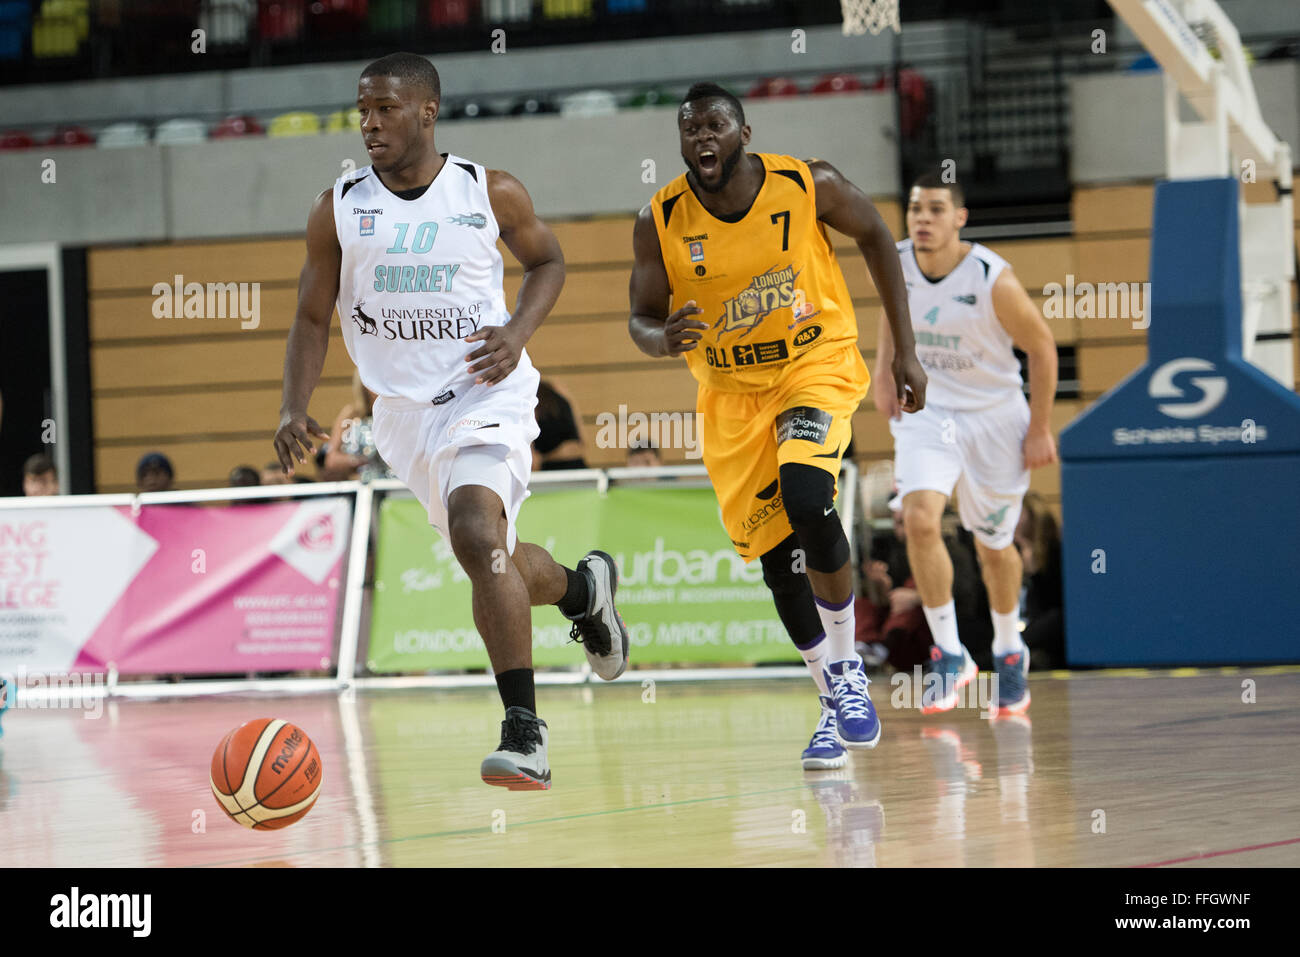 London, UK. 13th Feb, 2016. Surrey Scorchers K.C. Ross-Miller (10) being chased by Joe Ikhinmwin (07) London Lions Captain, Surrey beat the Lions (90 vs 82)at the Copper Box, London Olympic Park. Credit:  pmgimaging/Alamy Live News Stock Photo